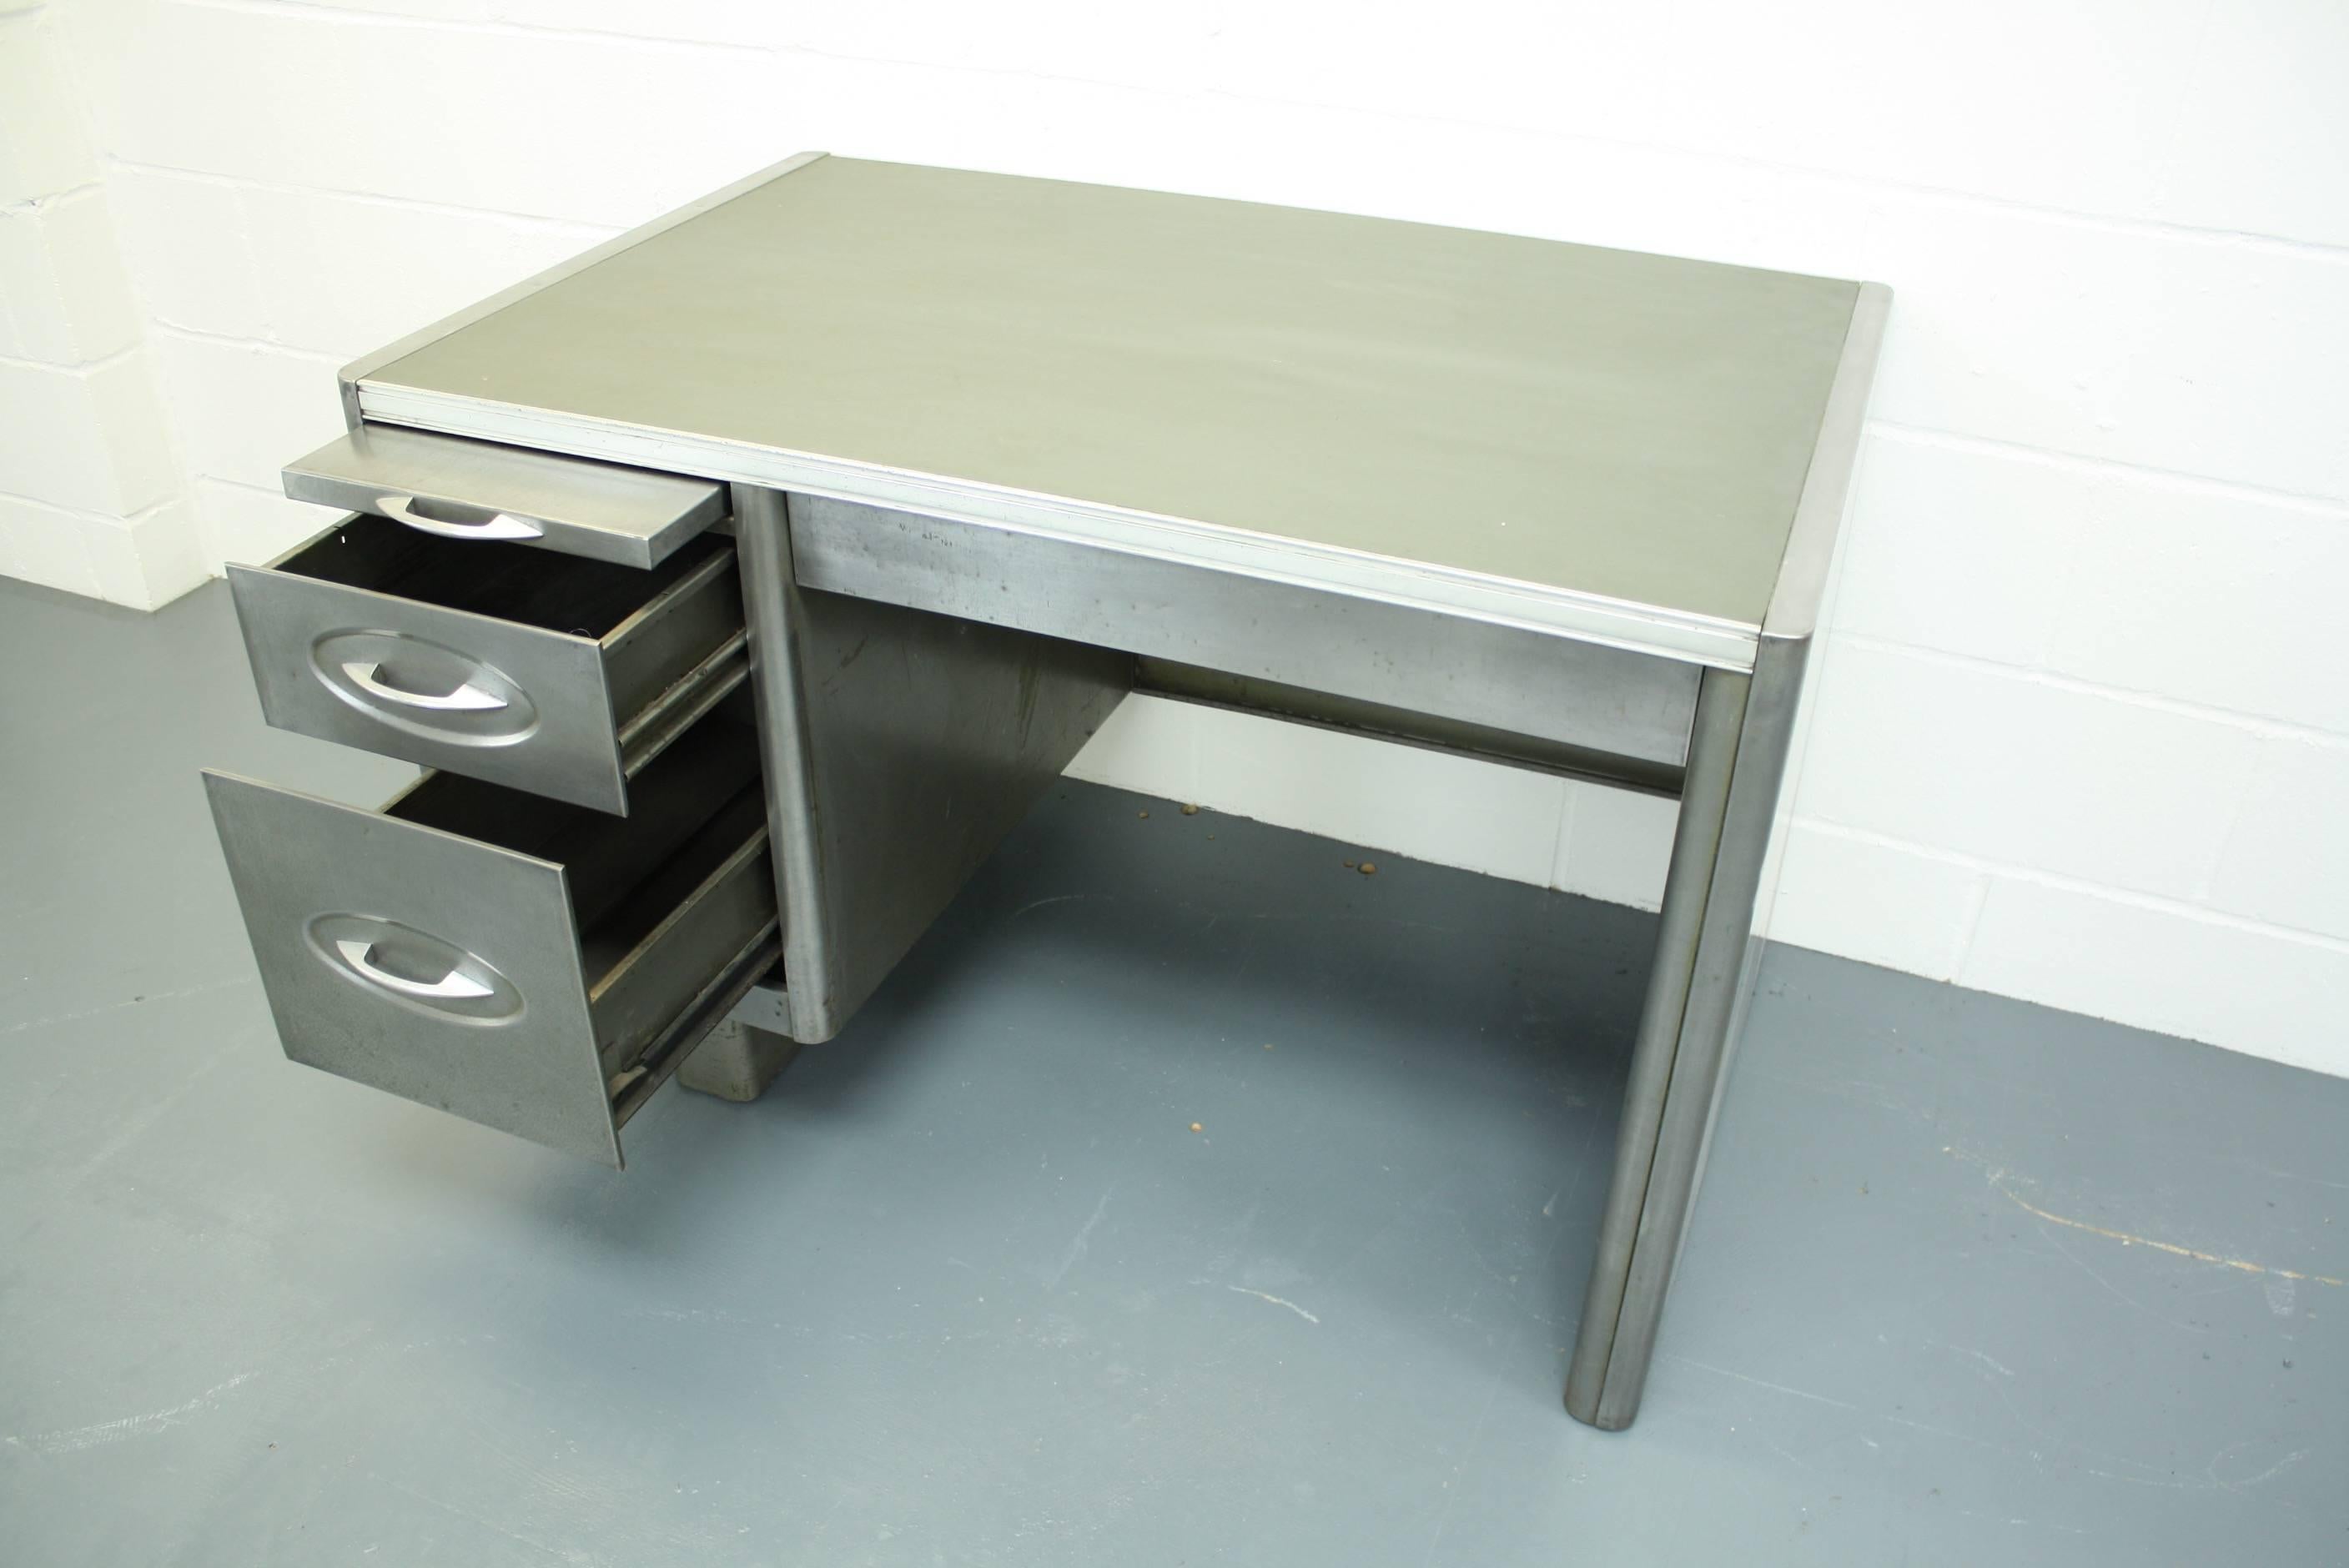 Vintage Industrial 1950s Polished Steel Desk In Good Condition For Sale In Lewes, East Sussex